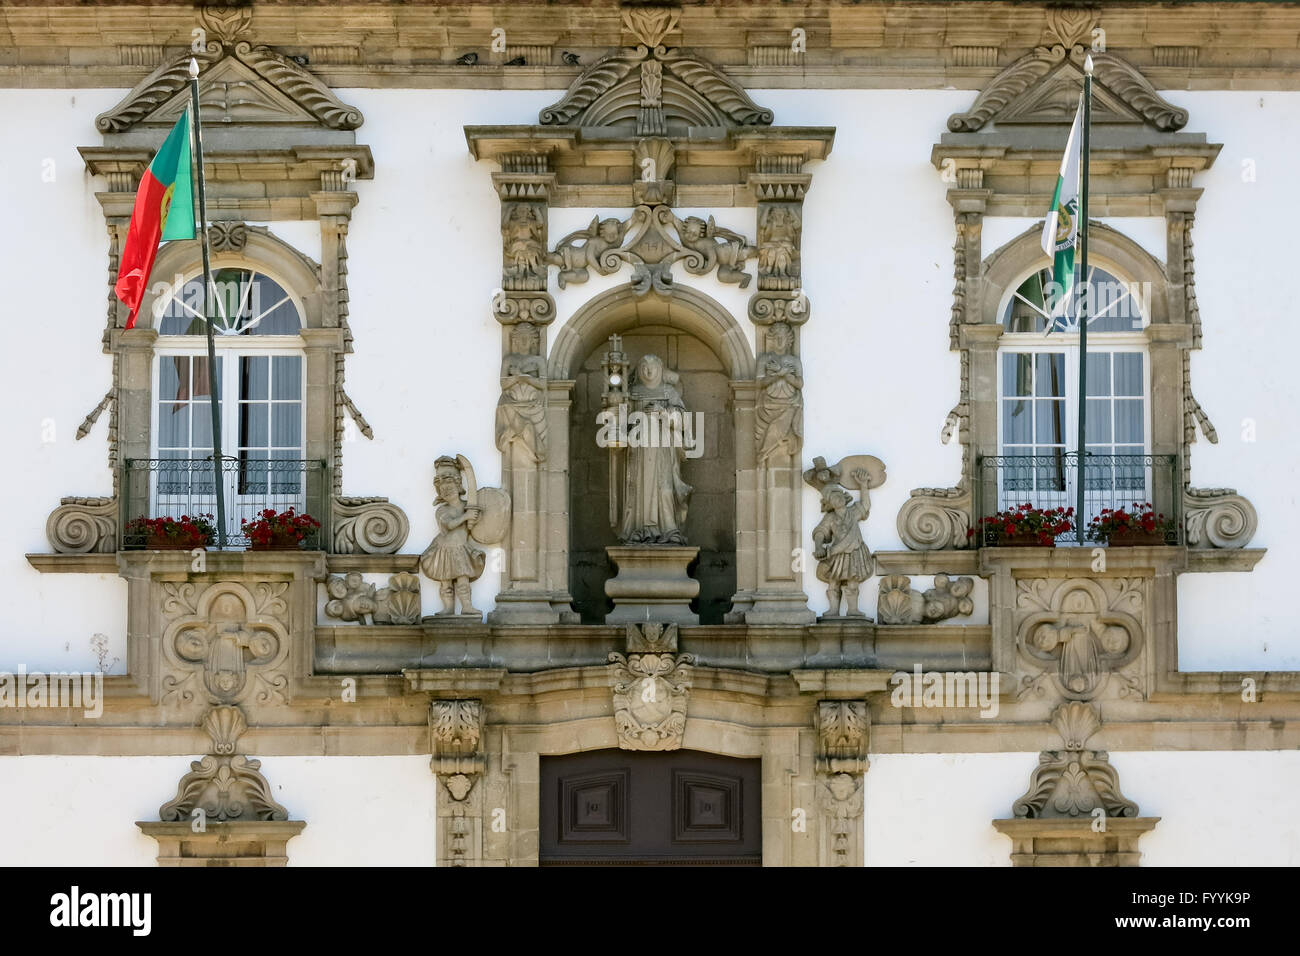 Detail of facade of former Convent of Santa Clara, now town hall in Guimaraes, Portugal Stock Photo